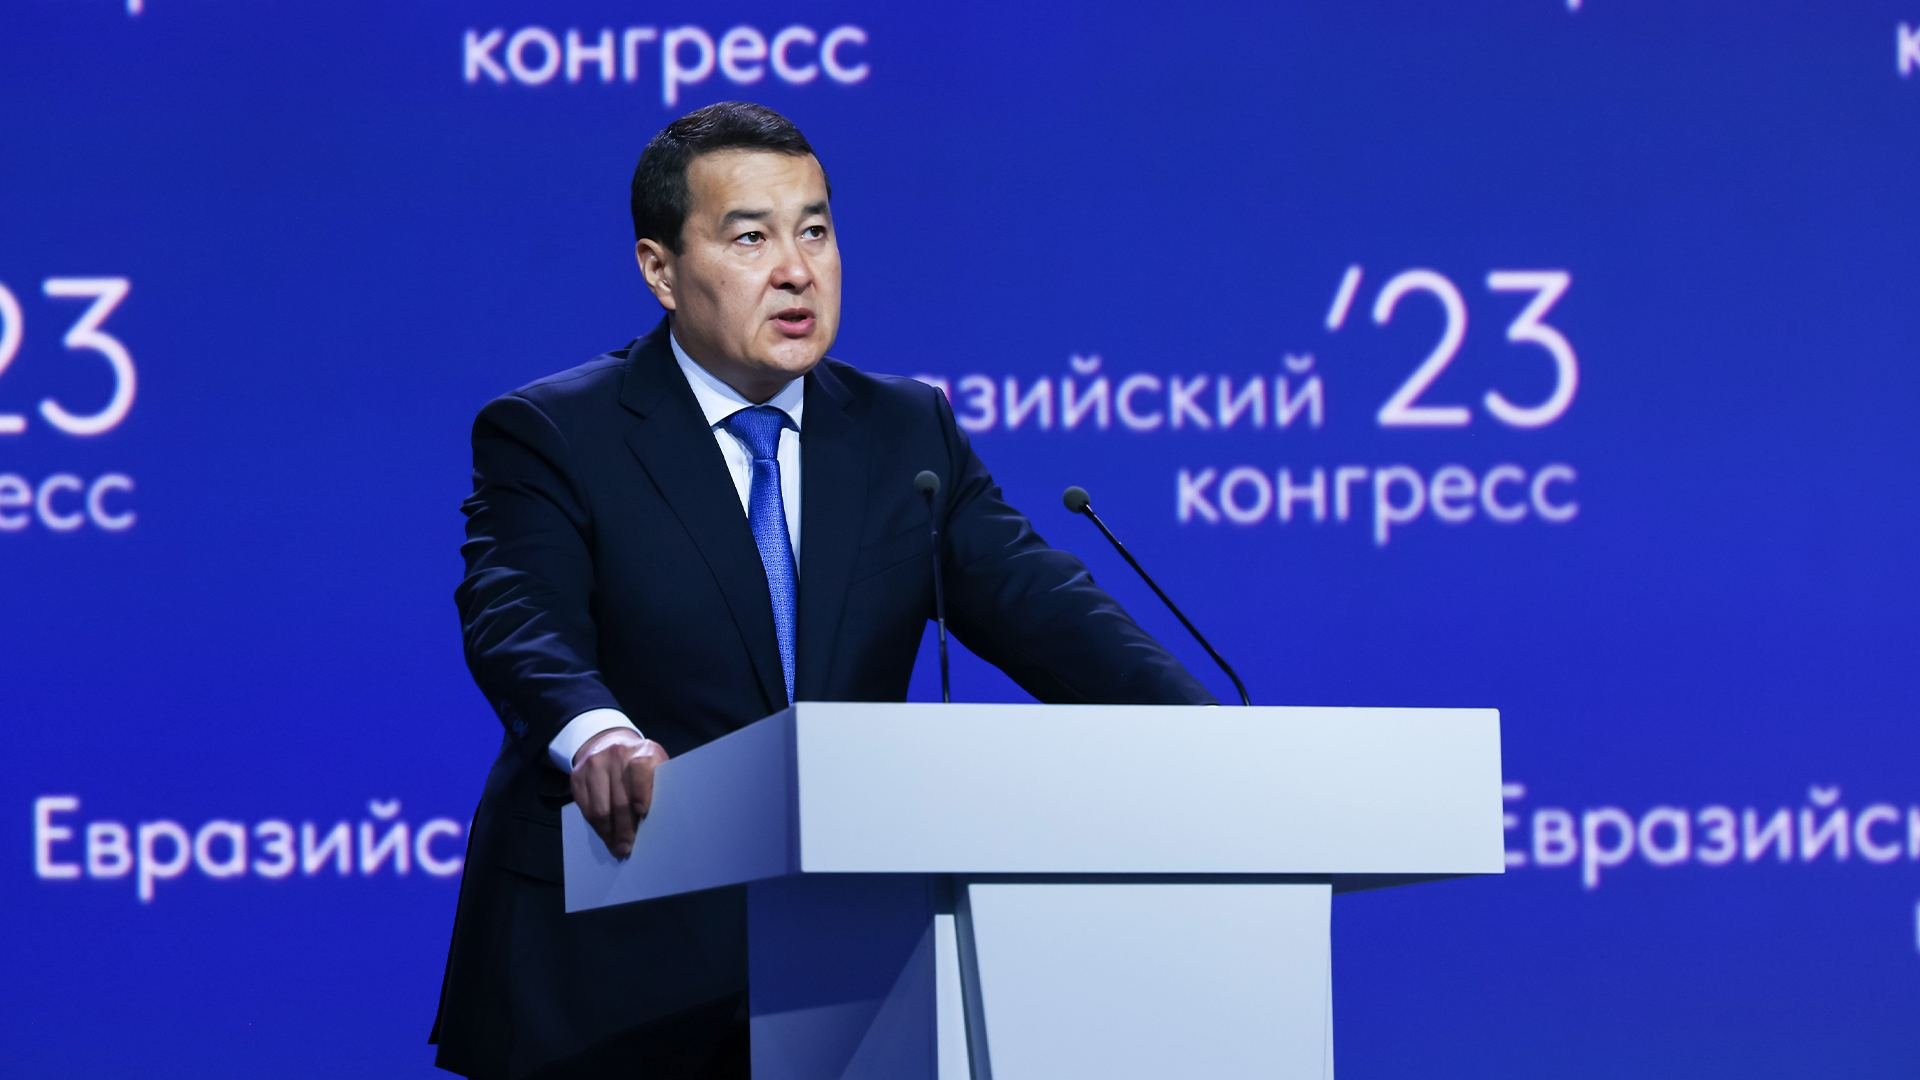 North-South corridor has huge potential in integration with TITR - Kazakh PM